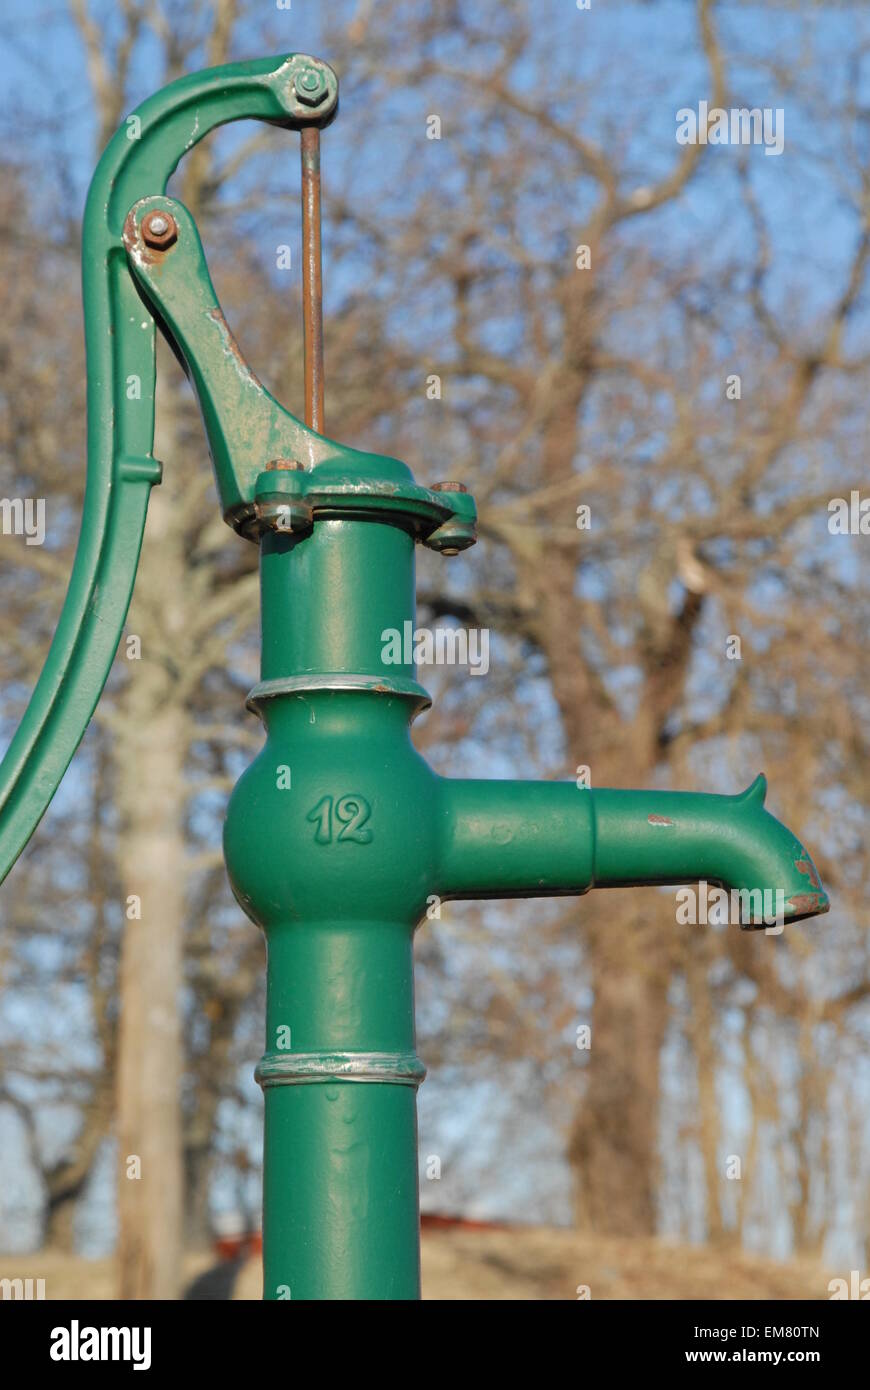 Old manual water pump,self supply of water. Stock Photo